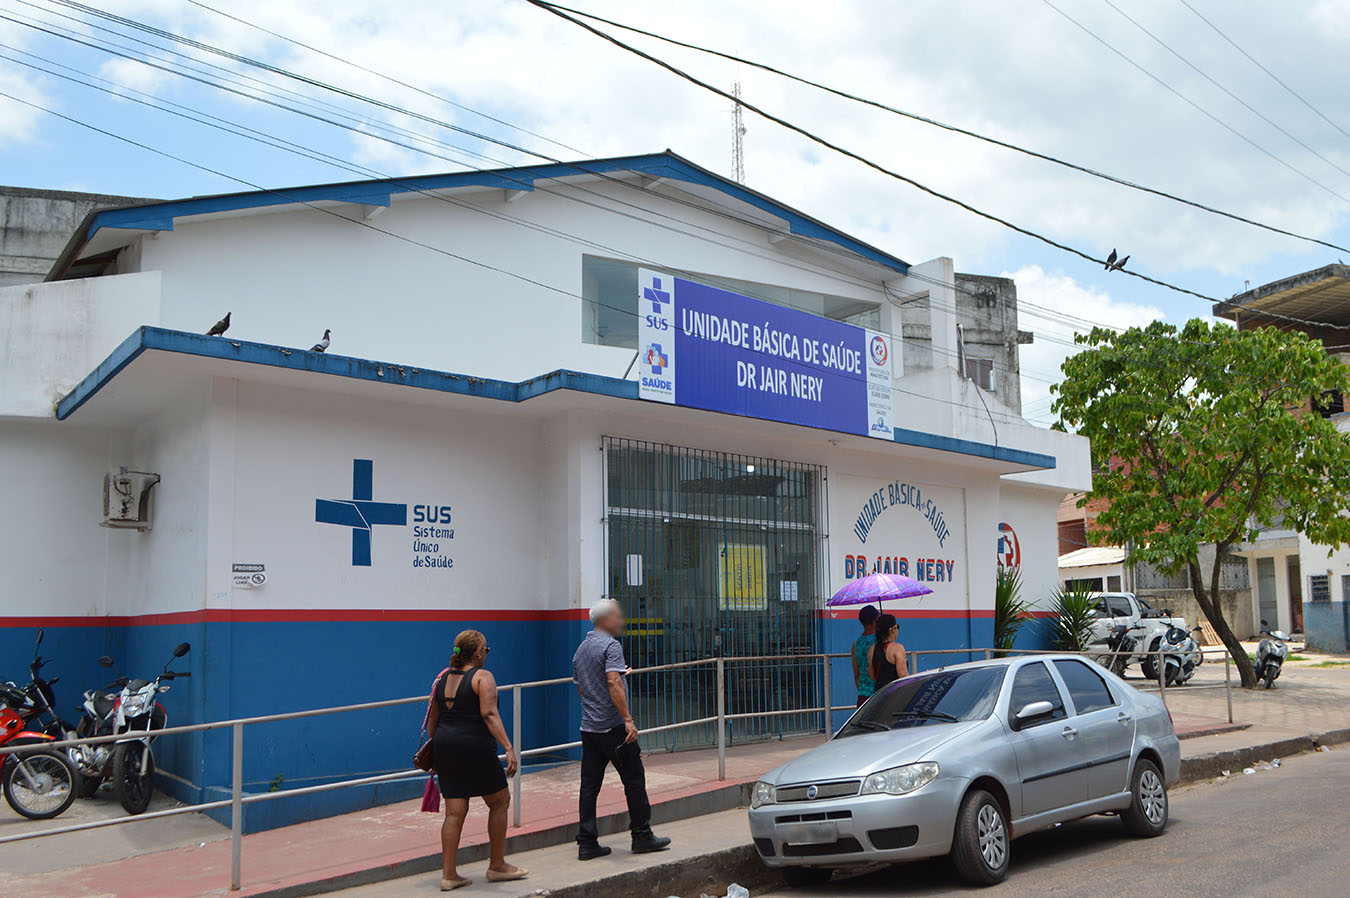 SUS Health Post “Dr. Jair Nery,” named after one of Abaetetuba’s first laboratory technicians and a well-respected municipal pharmacist. Photo by Matthew Abel, October 2019.